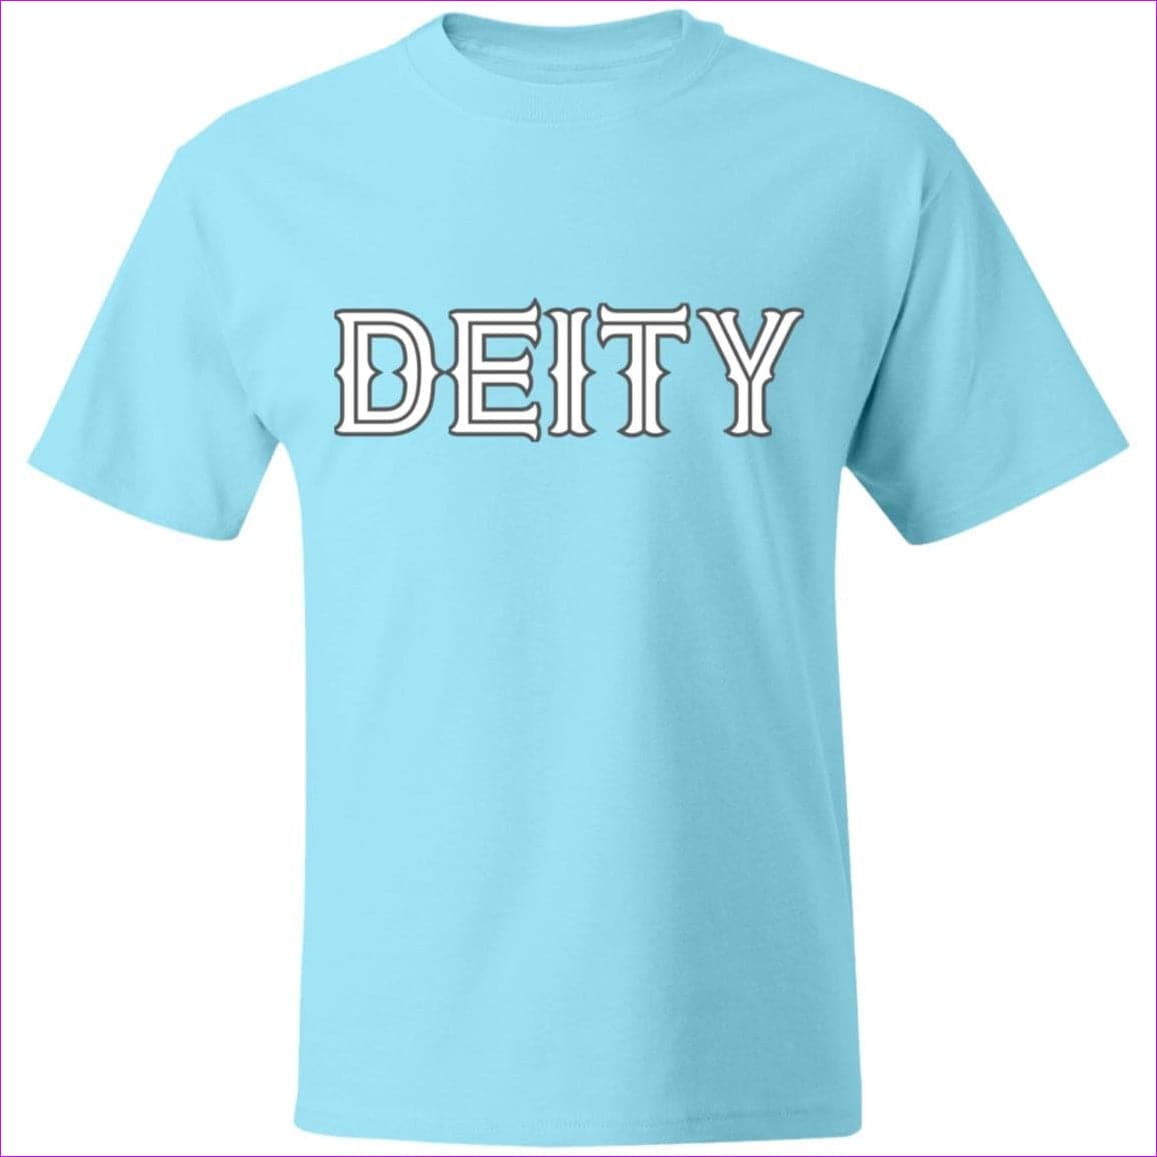 Pacific Blue - Deity Beefy T-Shirt - Mens T-Shirts at TFC&H Co.